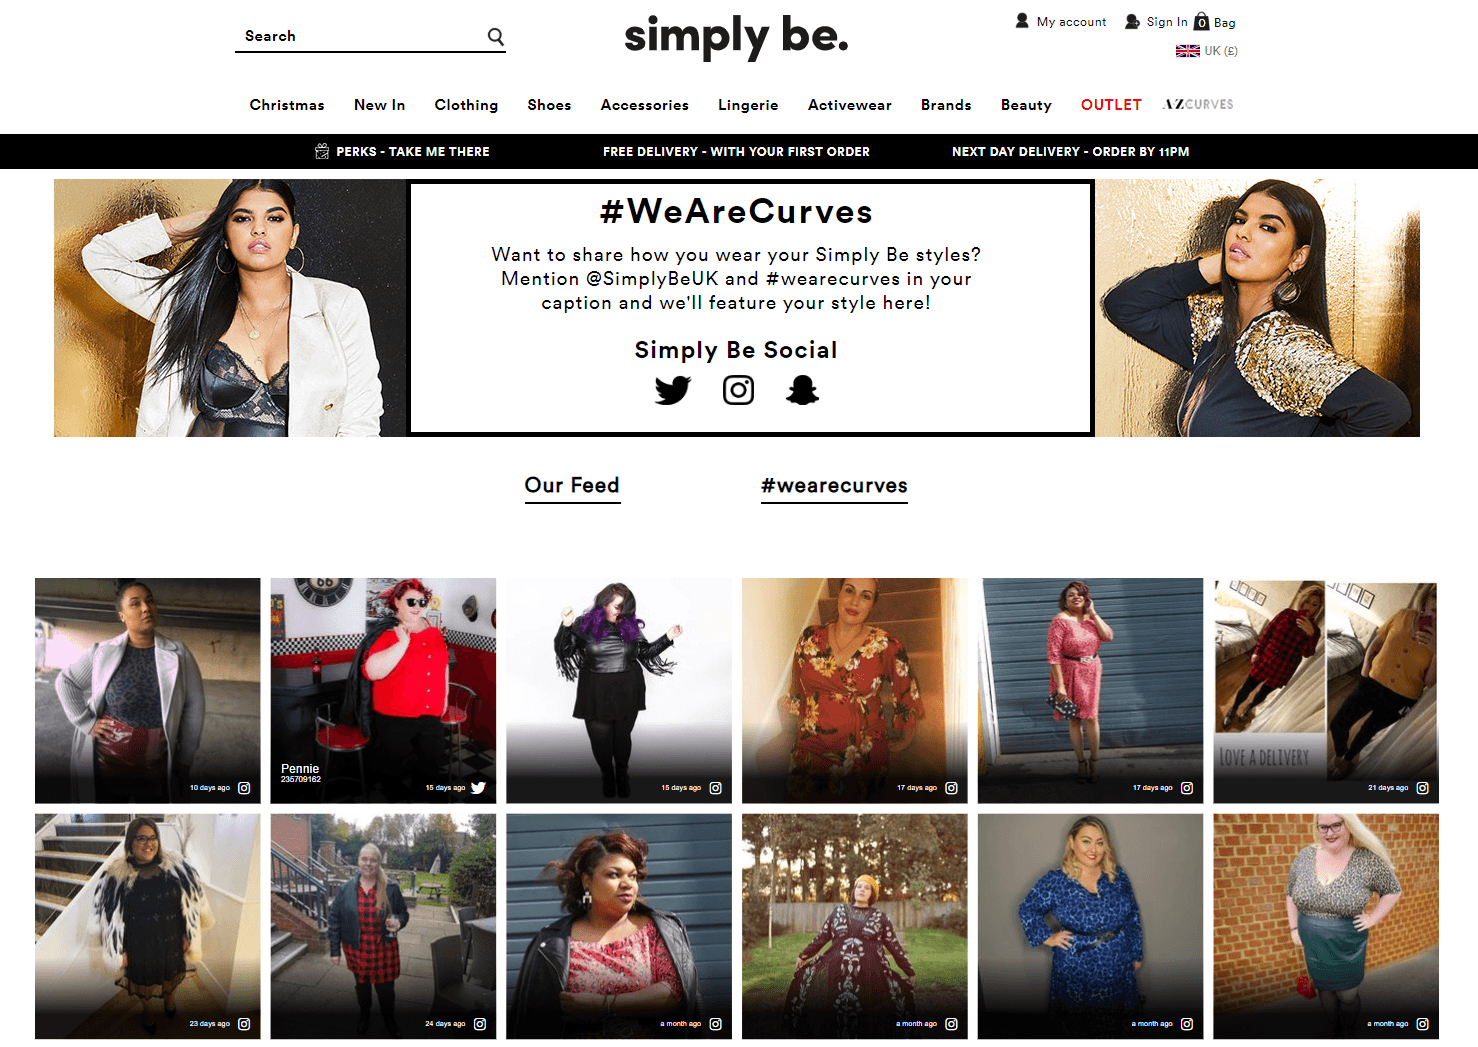 Plus-size womenswear retailer Simply Be asks its loyalty program members to post images wearing their favorite looks. Seeing their fellow customers enjoy Simply Be’s products feels authentic for buyers, which helps to spread word-of-mouth.